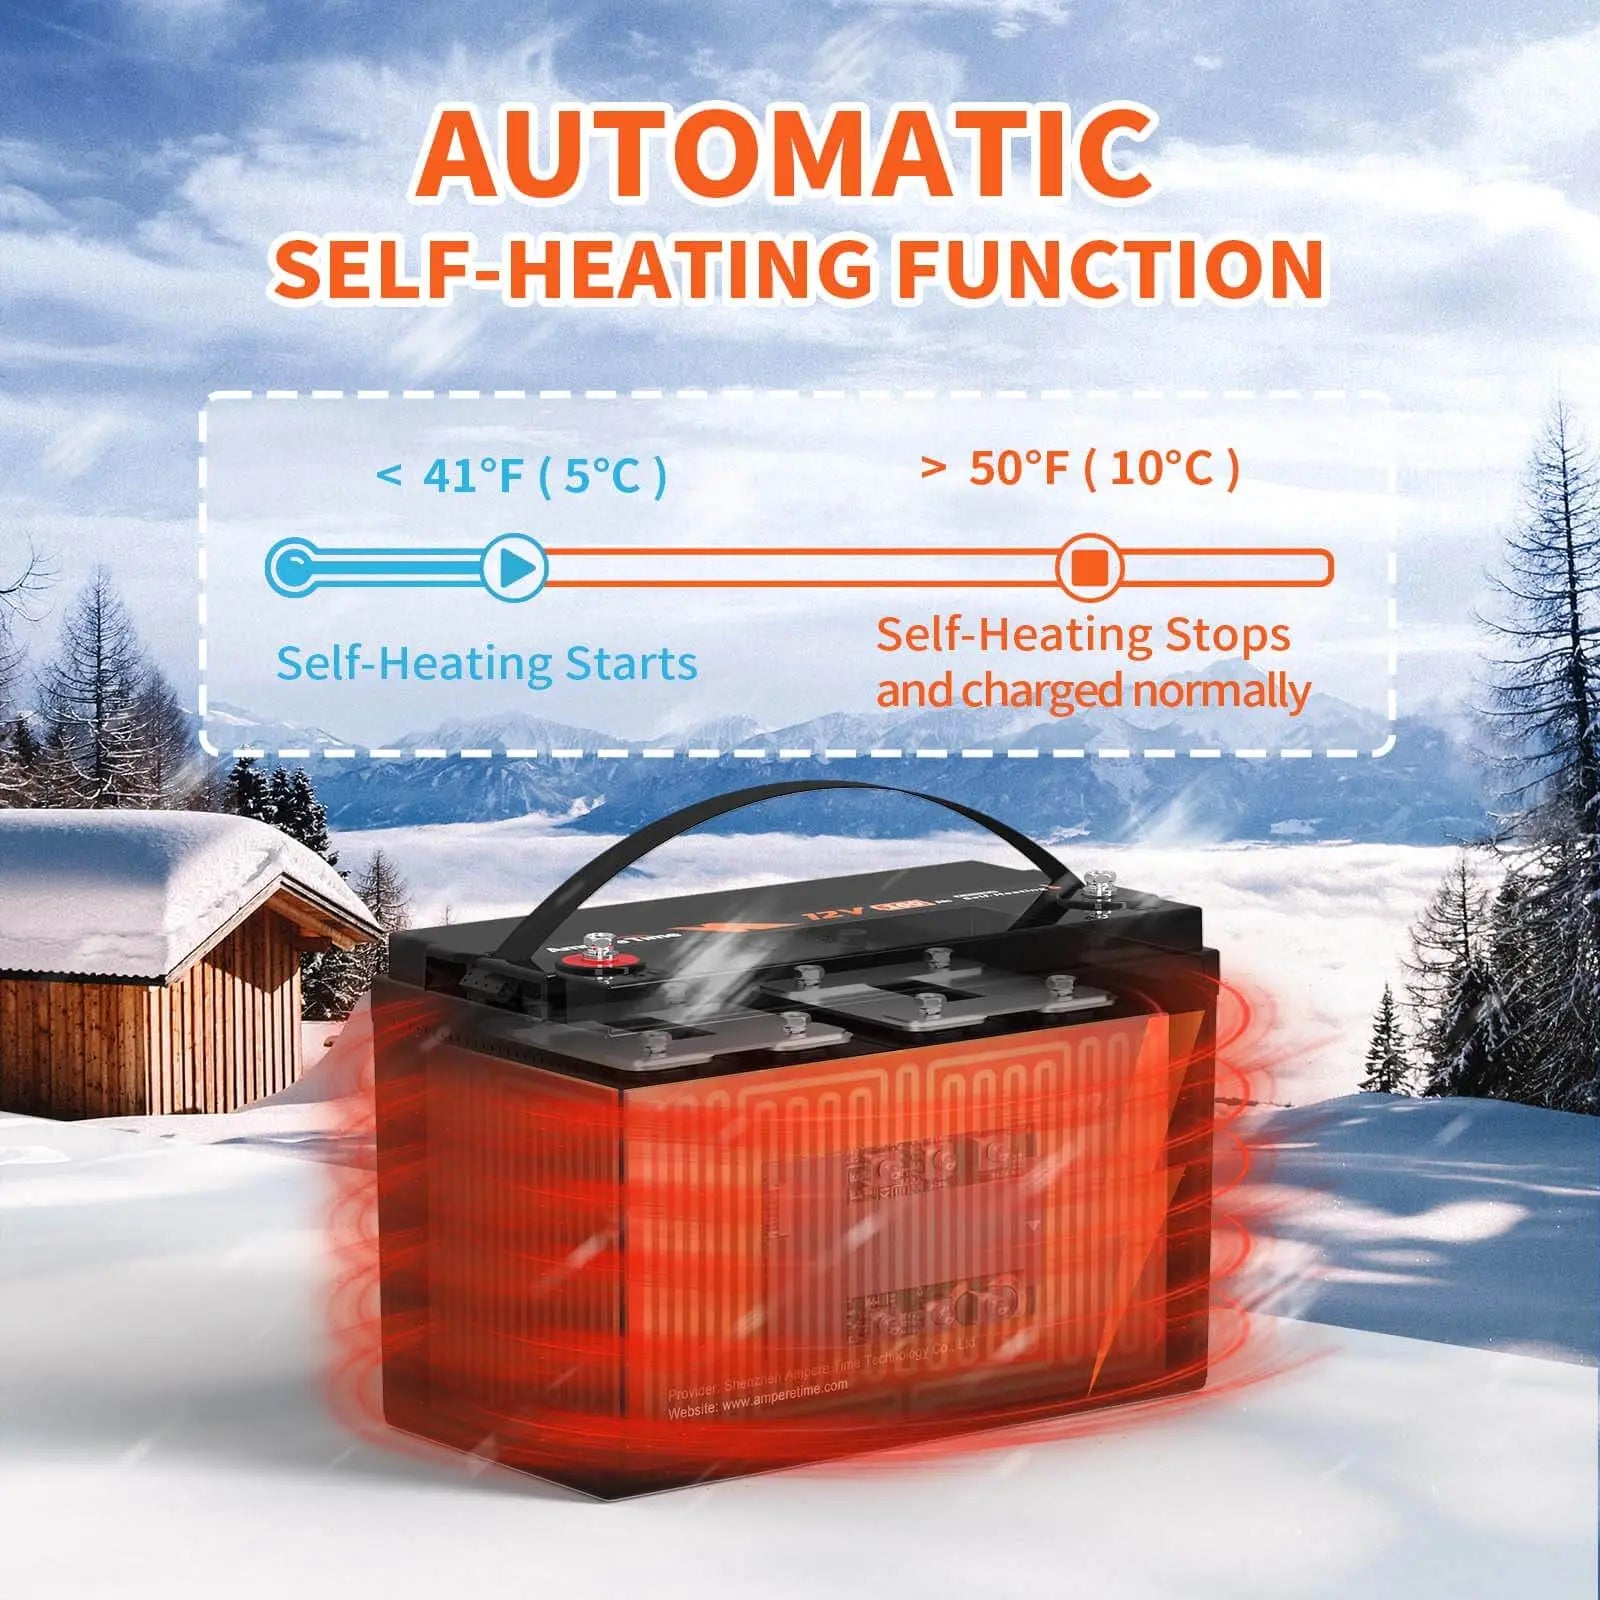 Ampere Time 12V 100Ah Lithium Battery with Self-Heating Low Temperature Charging (-20°C) Ampere Time